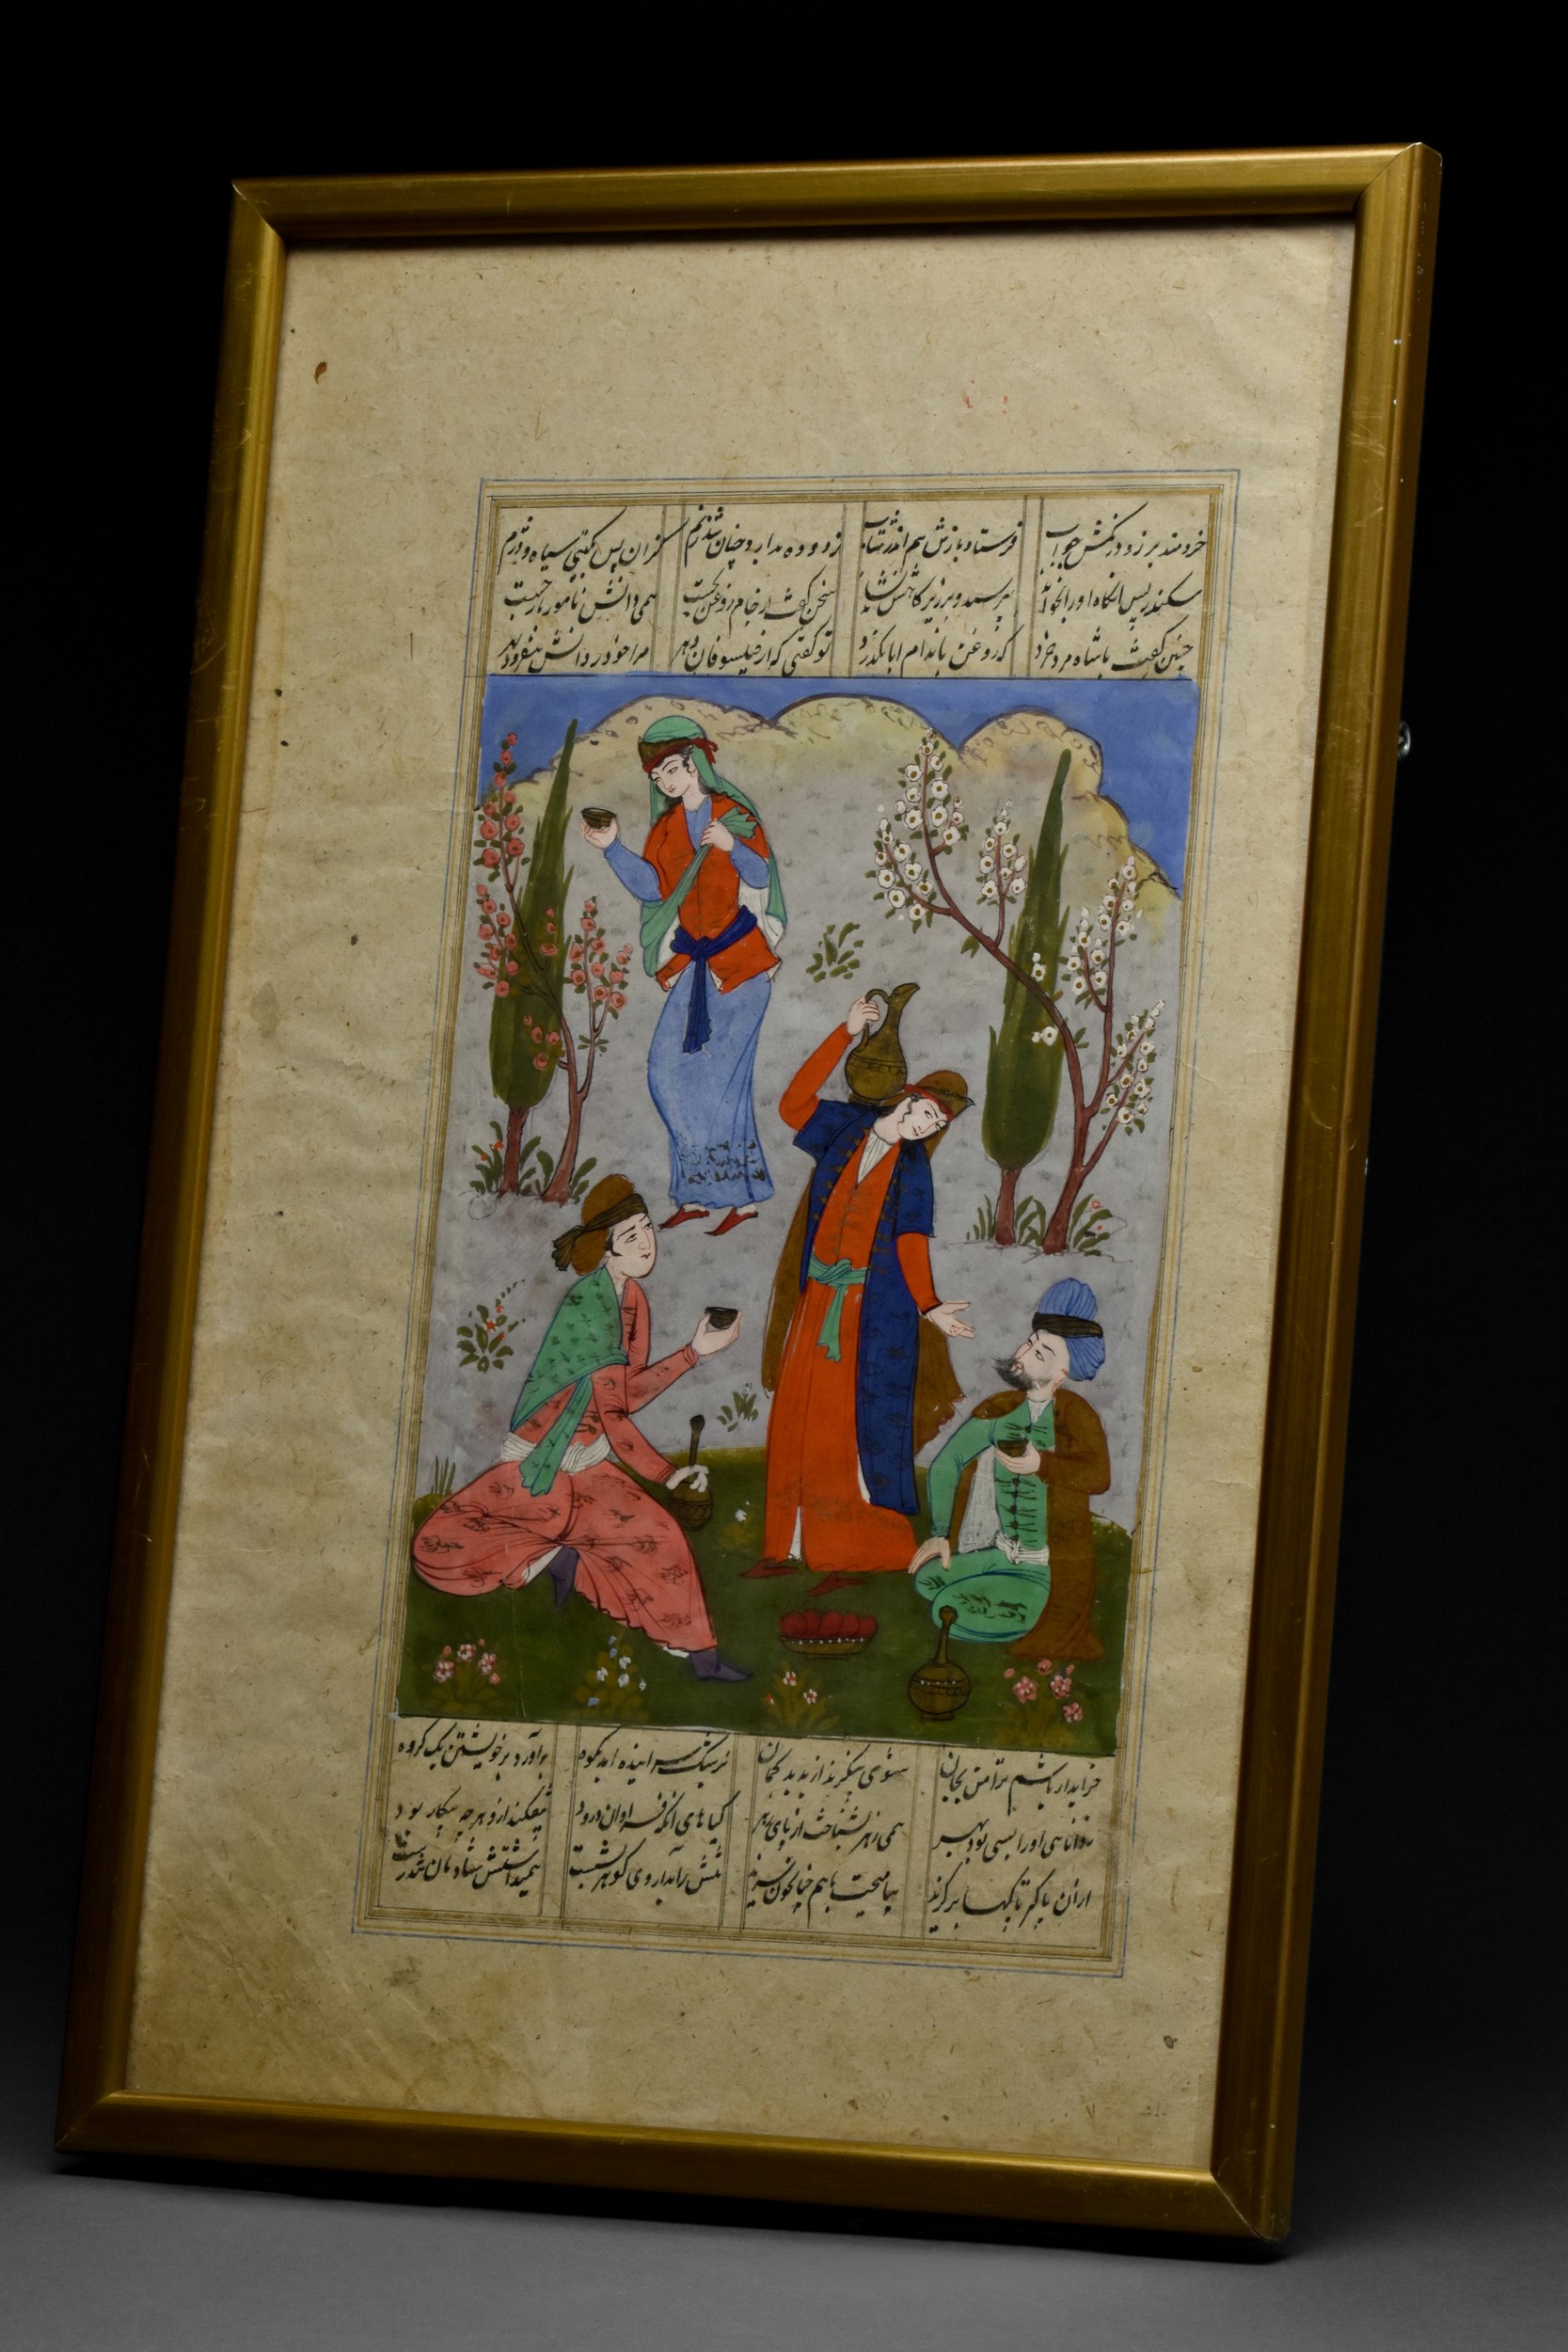 LATE SAFAVID OR QAJAR MANUSCRIPT PAGE WITH WOMEN SERVING DRINKS TO TWO MEN - Image 2 of 5